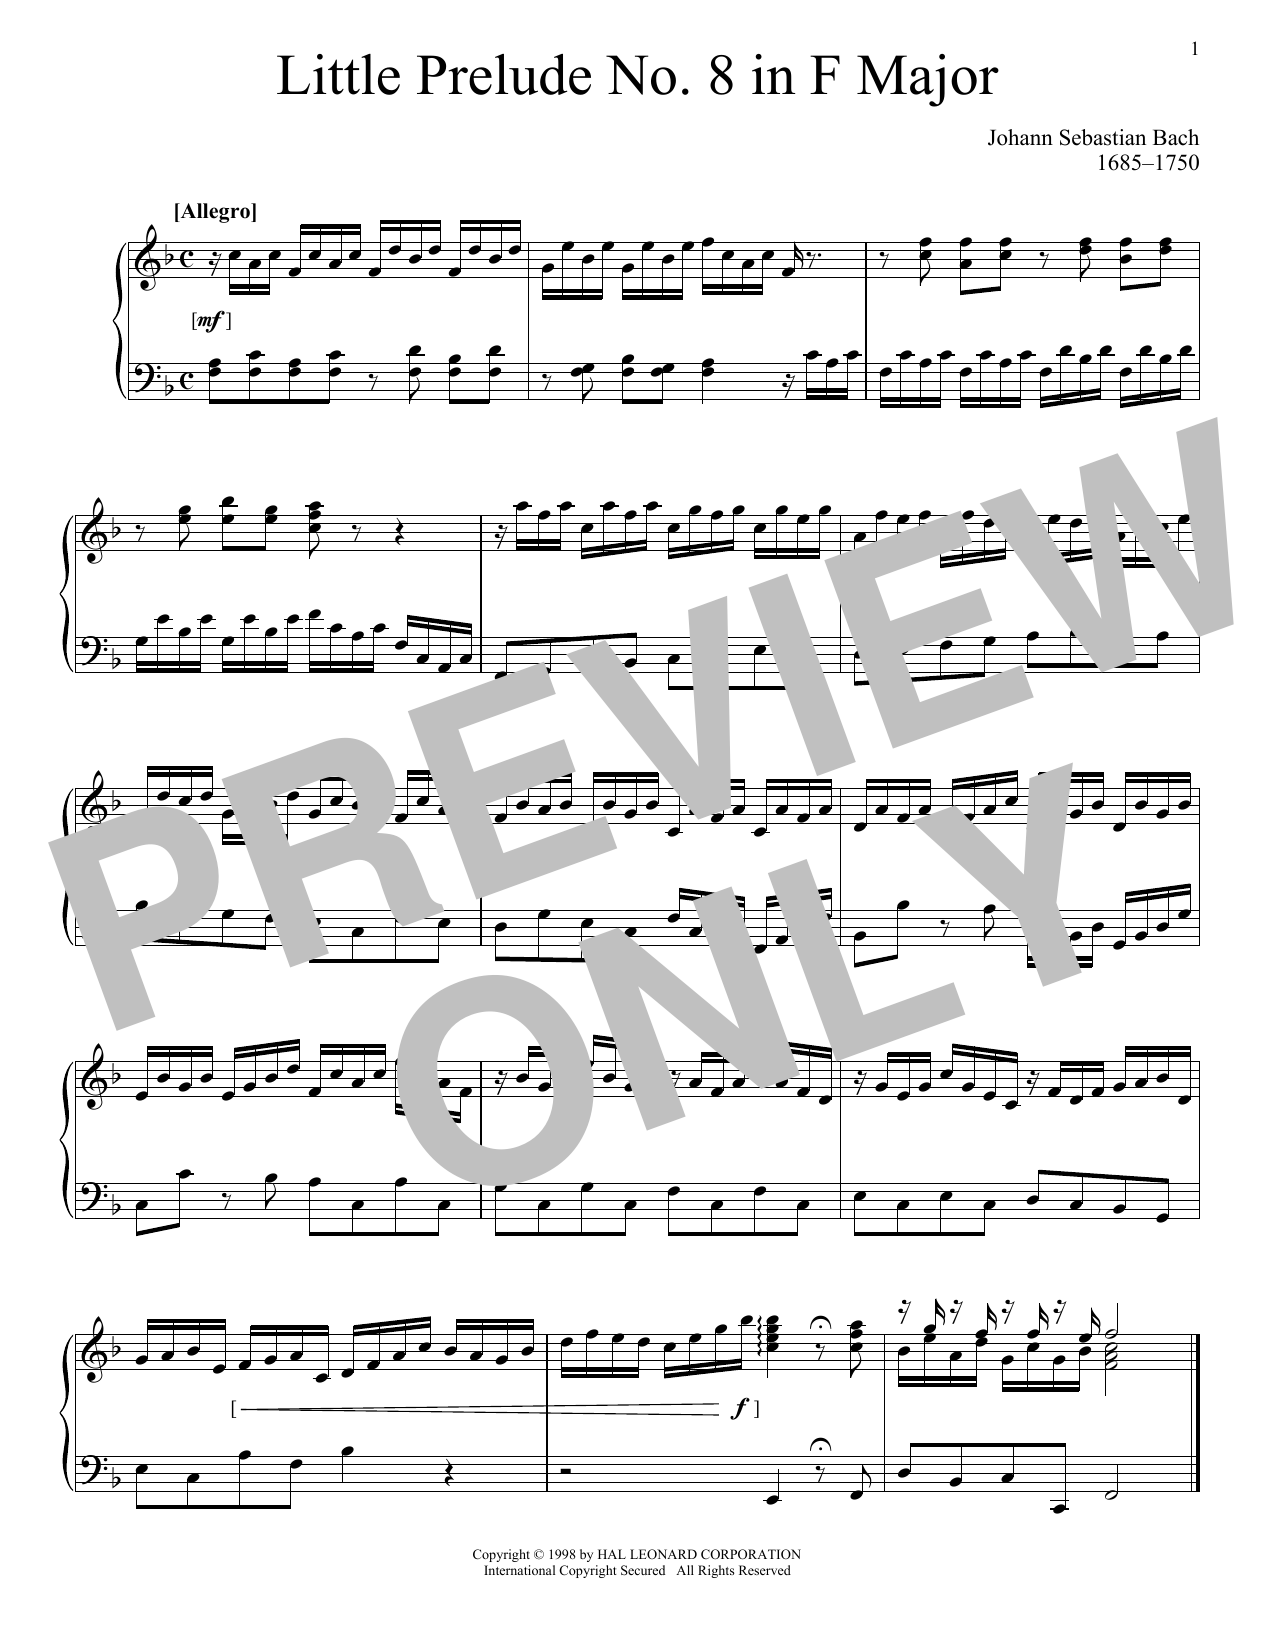 Download J.S. Bach Little Prelude No. 8 in F Major Sheet Music